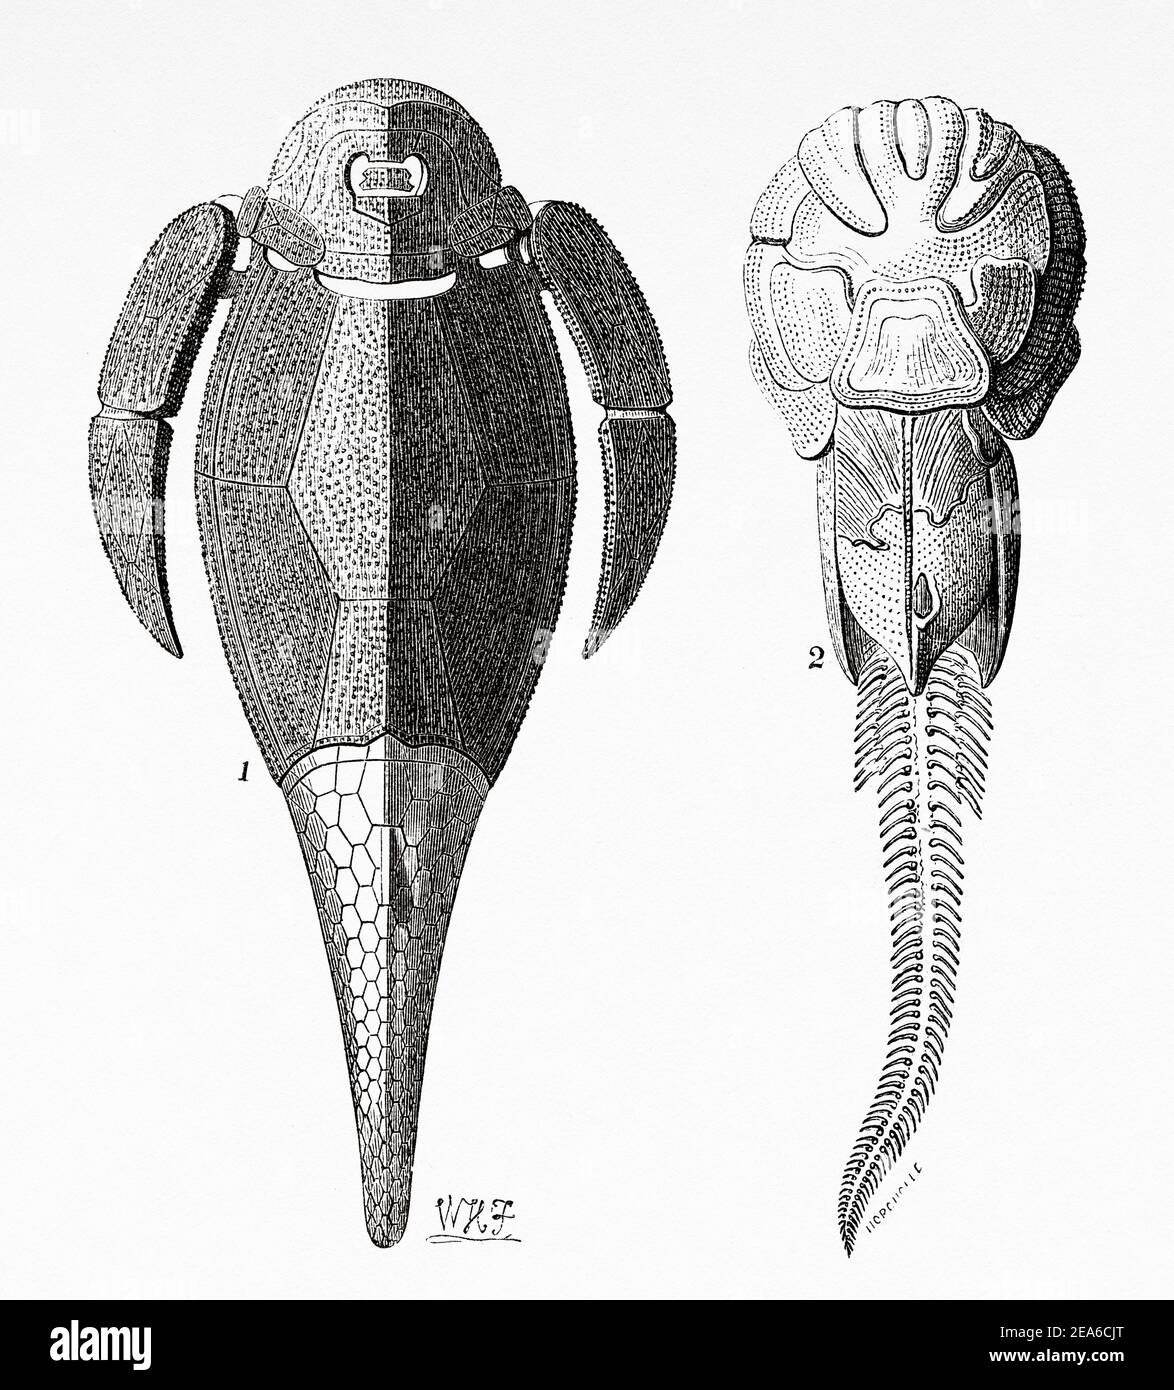 Old Nineteenth century illustration. 1 Pterichthyodes, genus of antiarch placoderm fish from the Devonian period. 2 Coccosteus, extinct genus of Devonian arthrodylar placoderm fish. Old 19th century engraved illustration from El Mundo Ilustrado 1879 Stock Photo